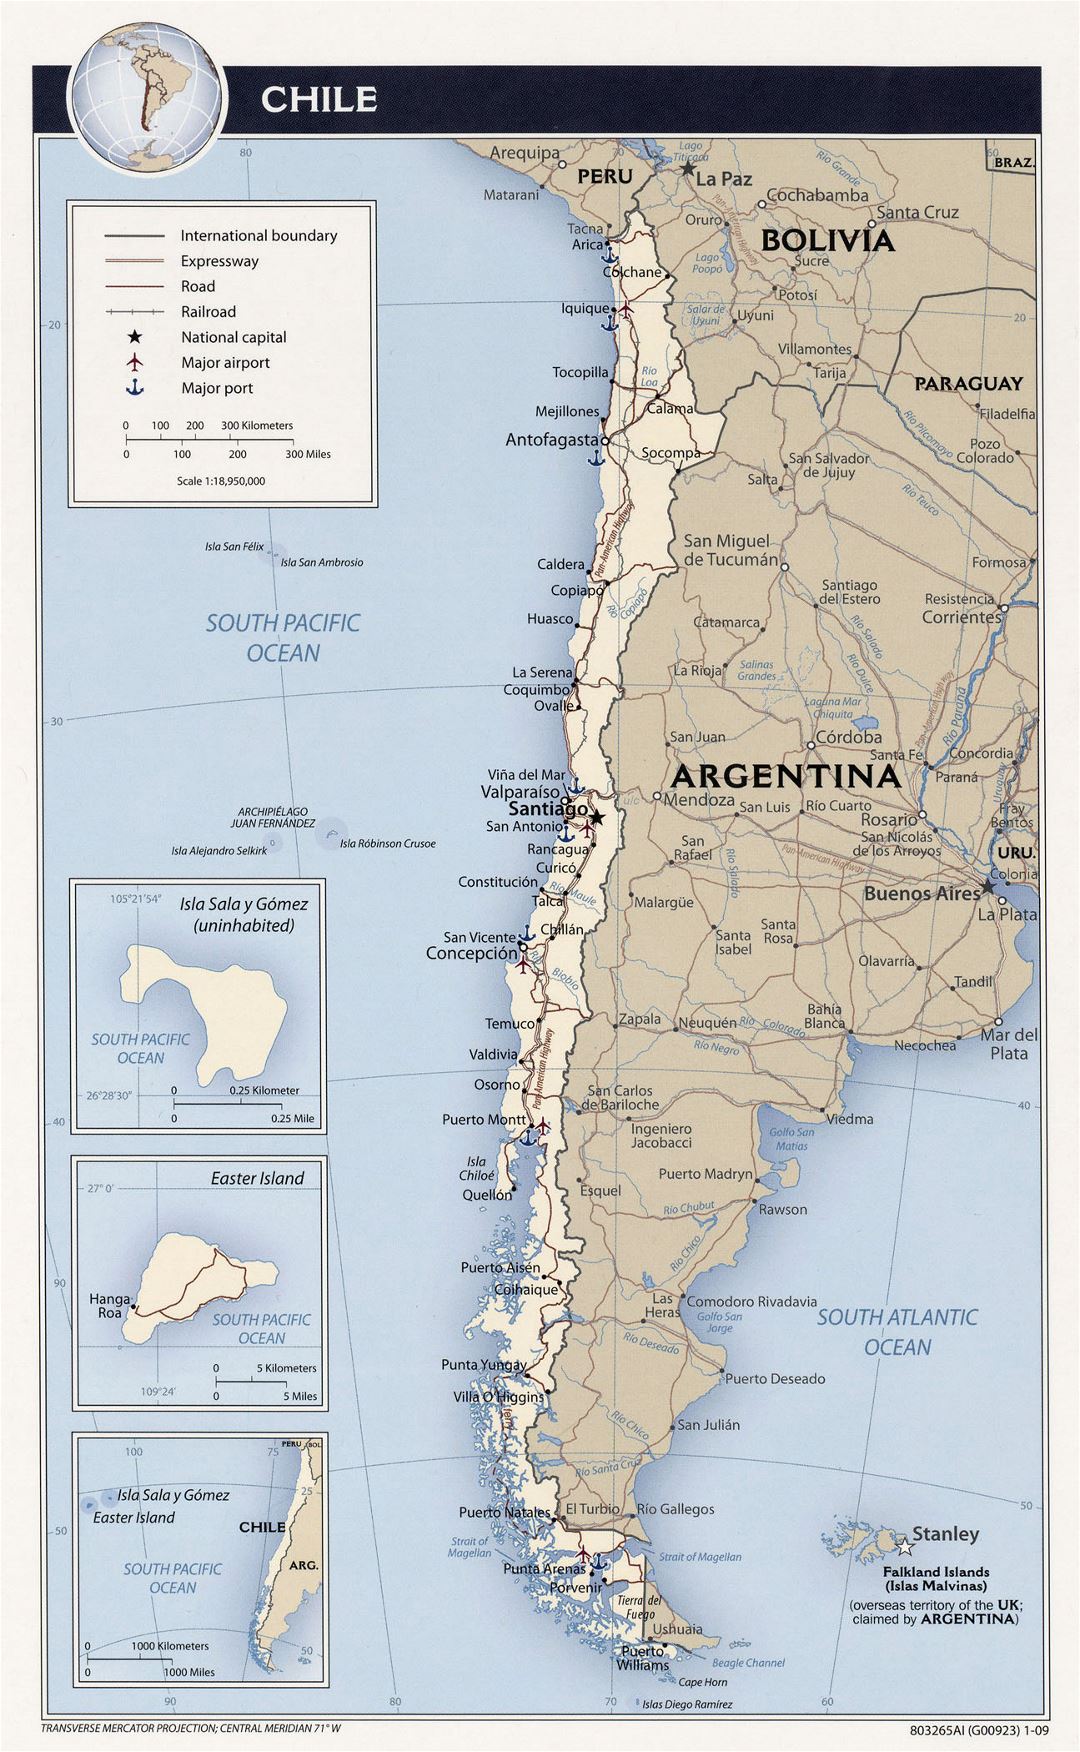 Detailed political map of Chile with roads, cities, airports and sea ports - 2009